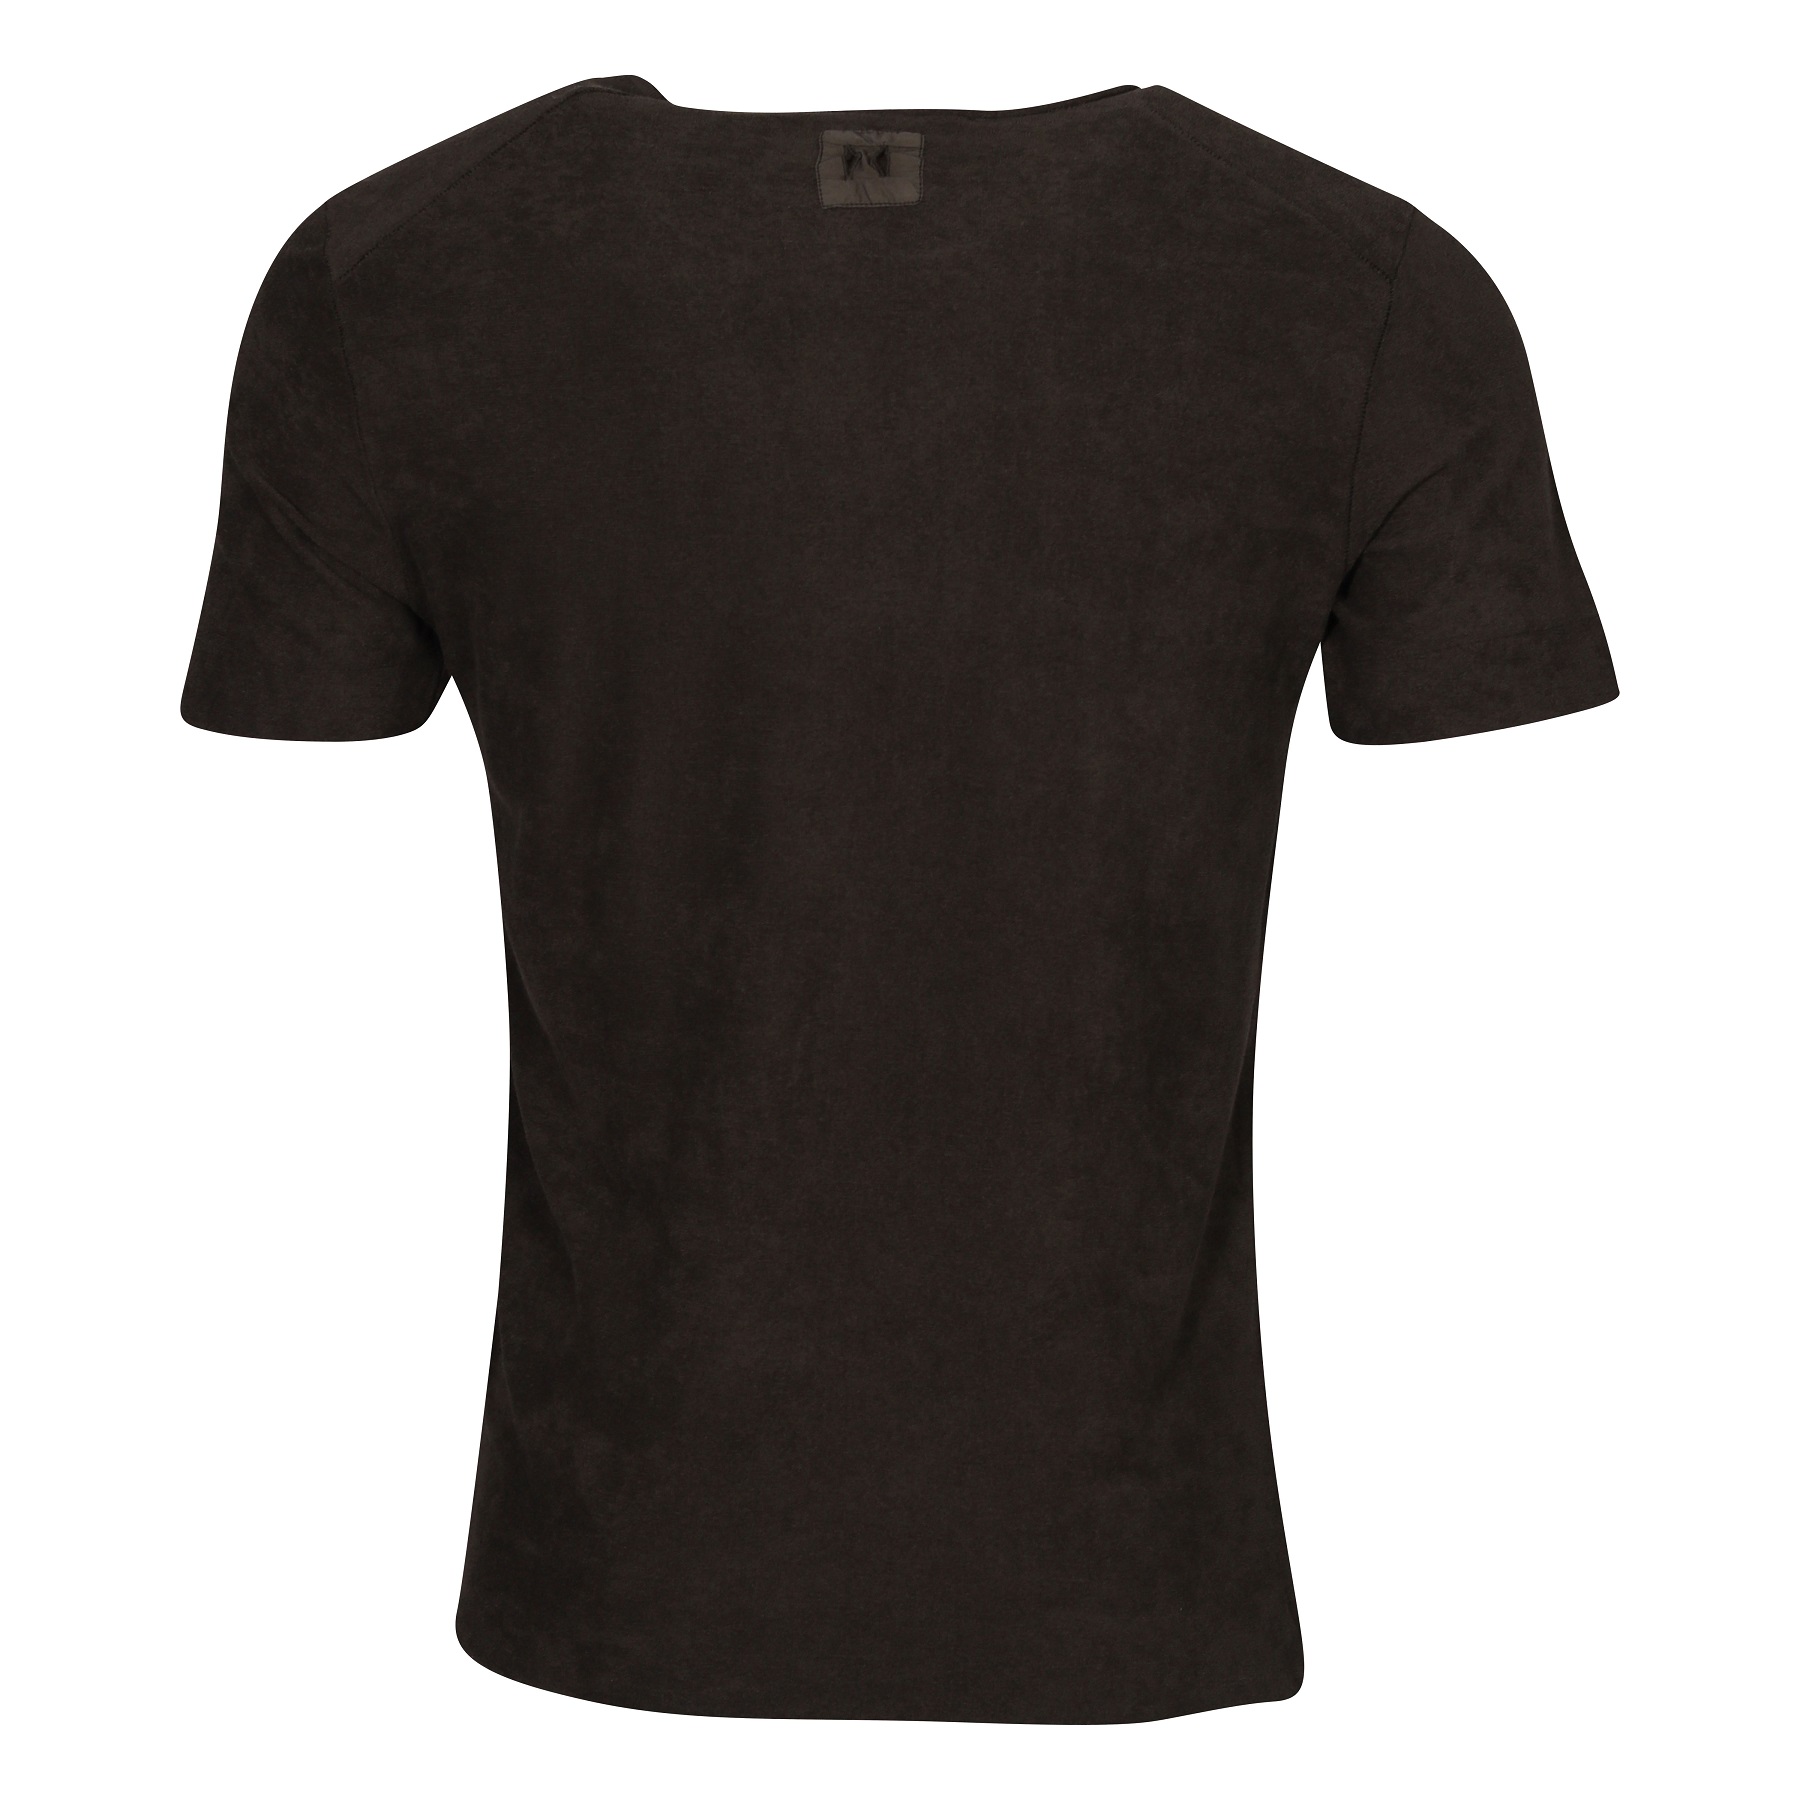 HANNES ROETHER Terry T-Shirt in Brown L